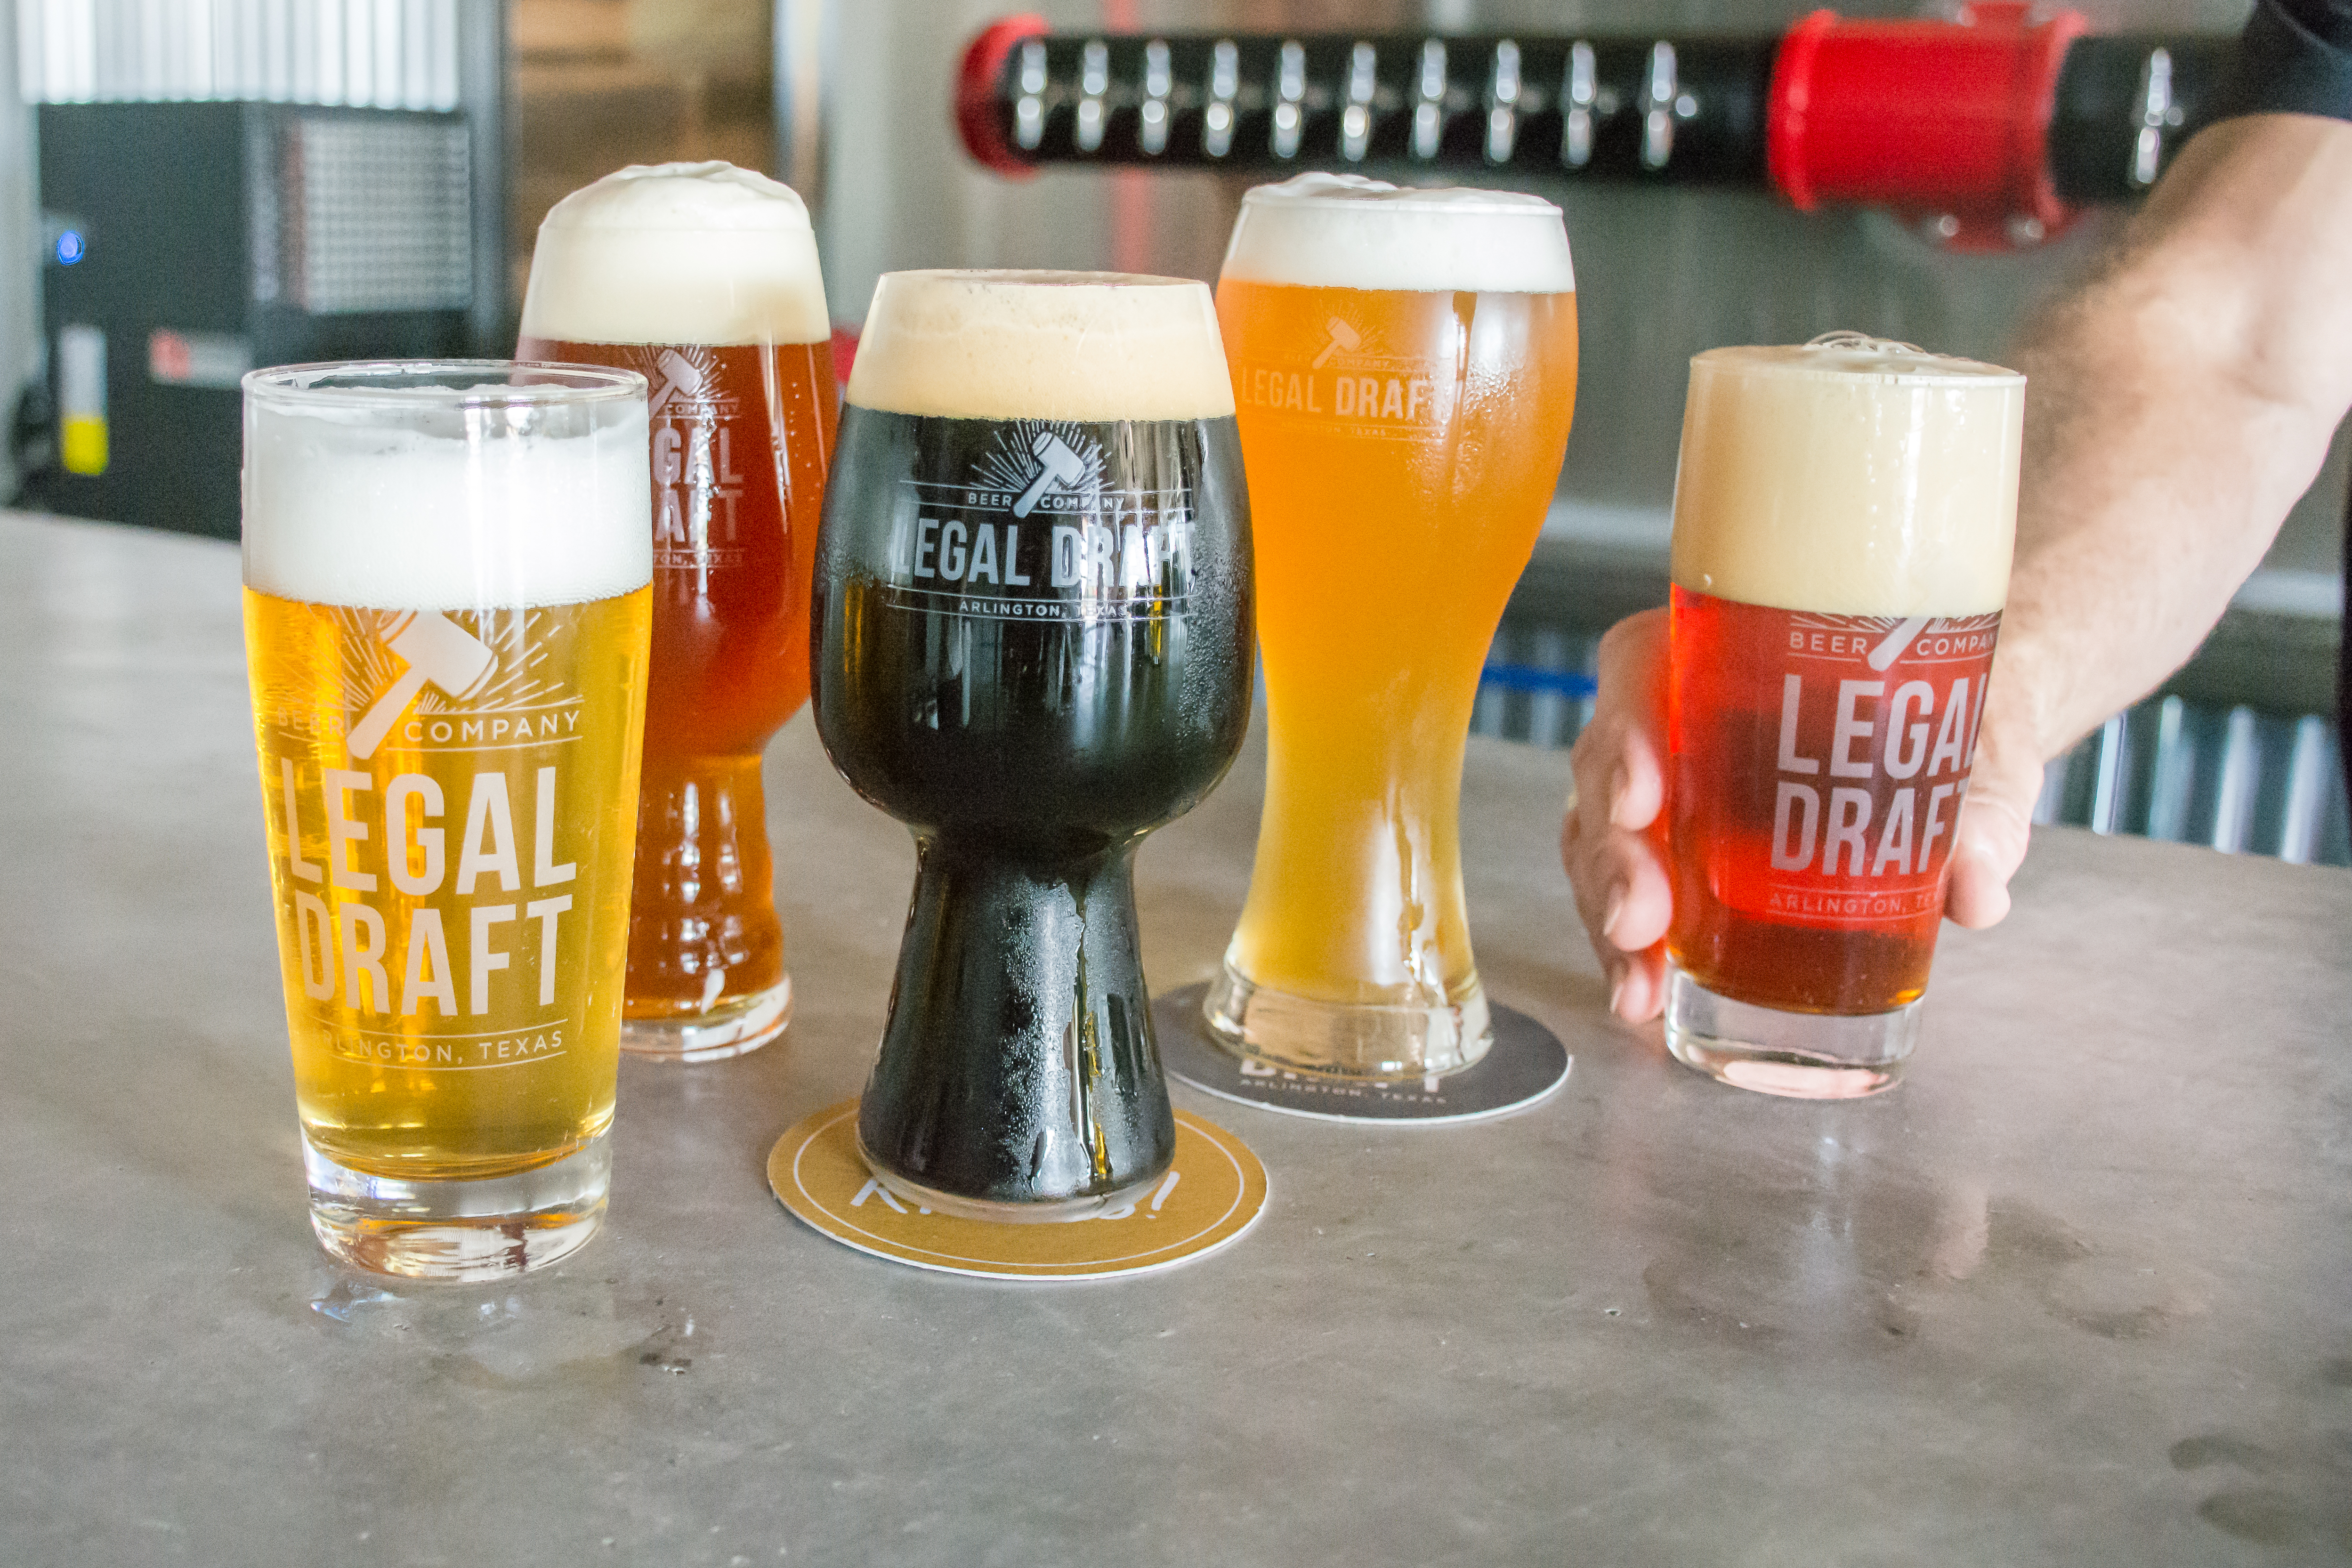 Legal Draft's five launch beers - Legal Blonde Lager, Alibi Amber Lager, Presumed Innocent IPA, Chief Justice Stout, and Hung Jury Hefeweizen